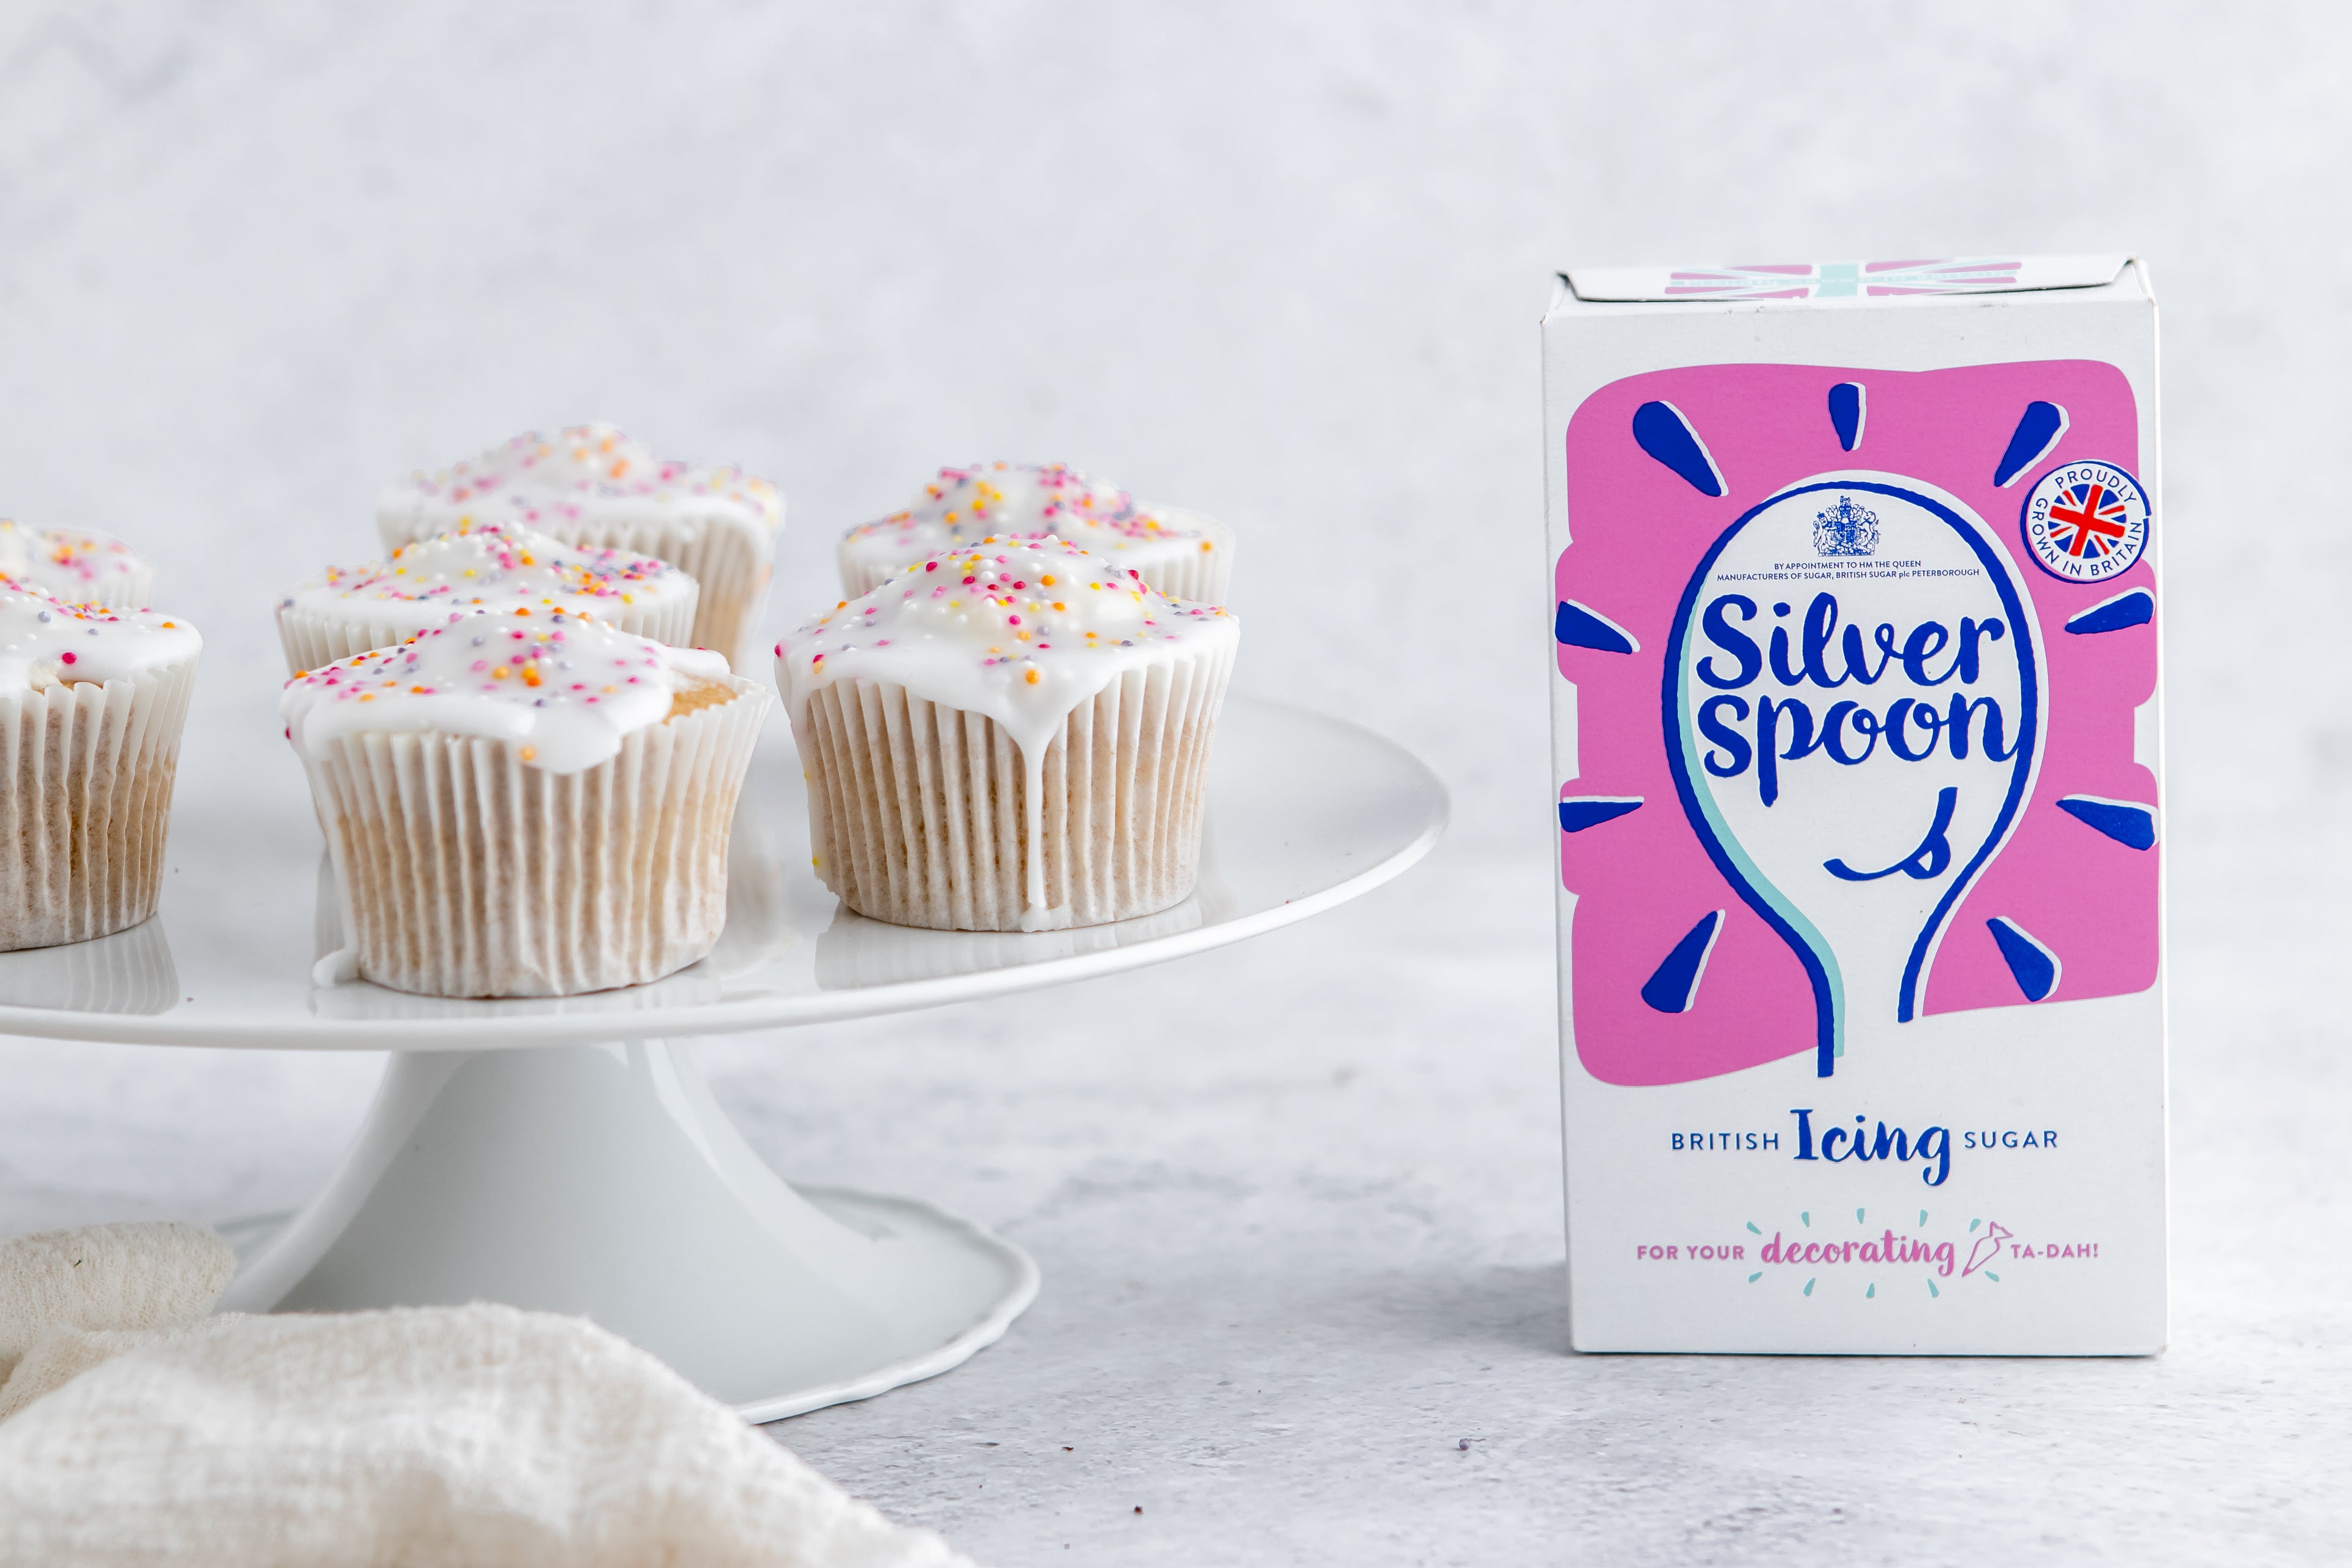 Simple Fairy Cakes on a cake stand, with sprinkles and running icing. Next to a box of Silver Spoon Icing sugar